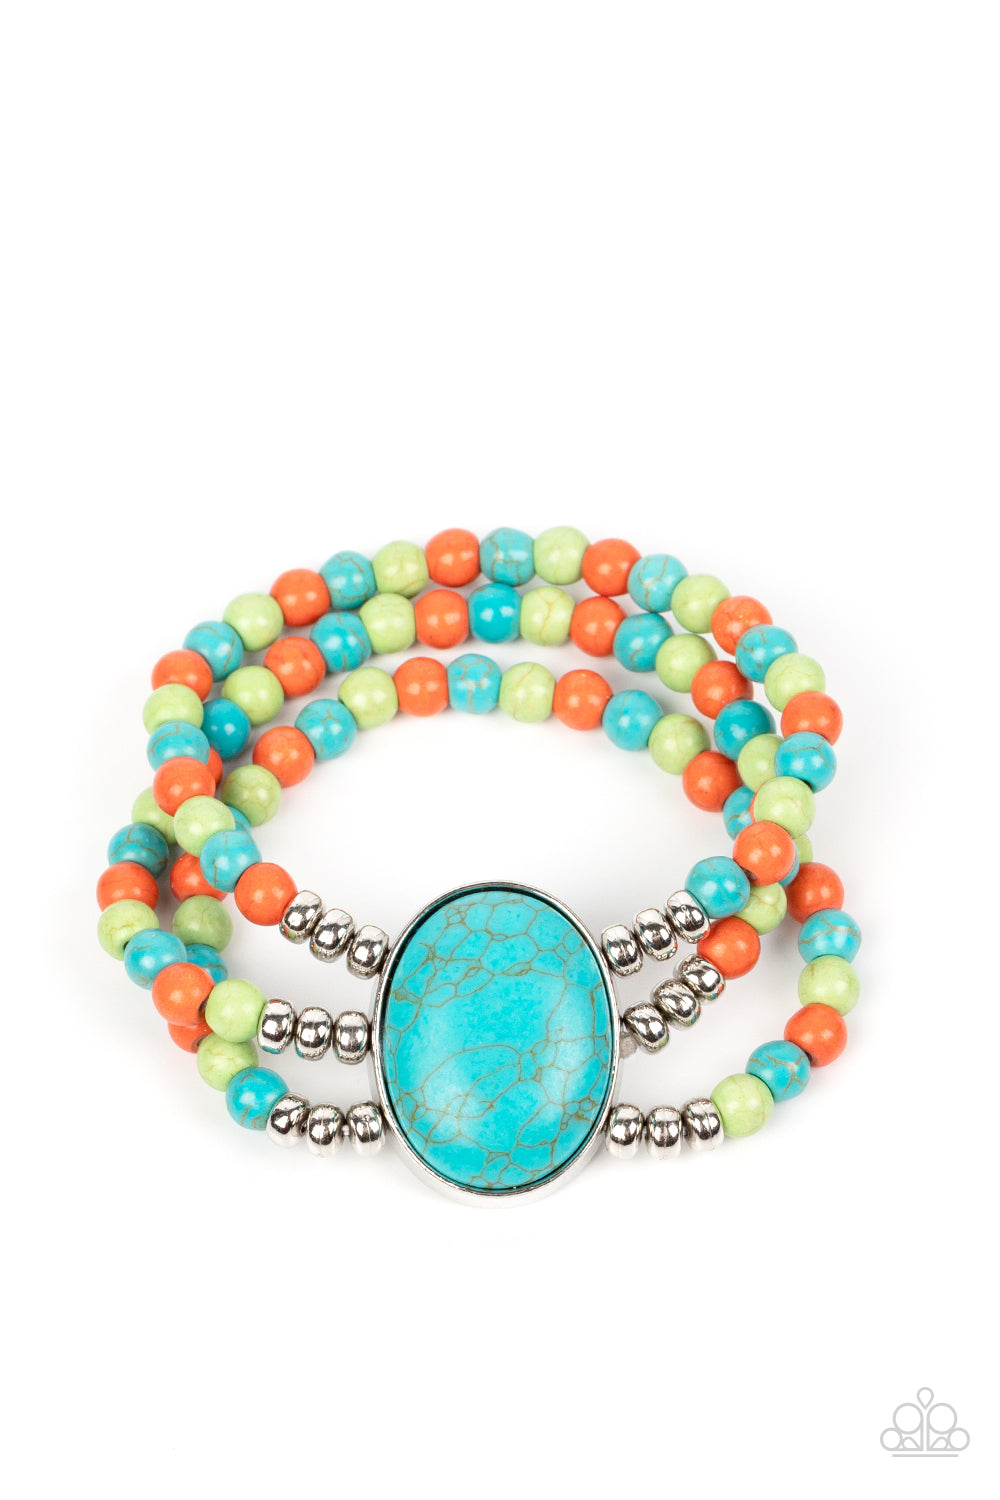 Stone Pools Multi Bracelet - Paparazzi Accessories  Layers of turquoise, green, and orange stone beads are threaded along stretchy bands that connect to a stunning oval turquoise stone, creating an extraordinary statement piece around the wrist.  Sold as one individual bracelet.